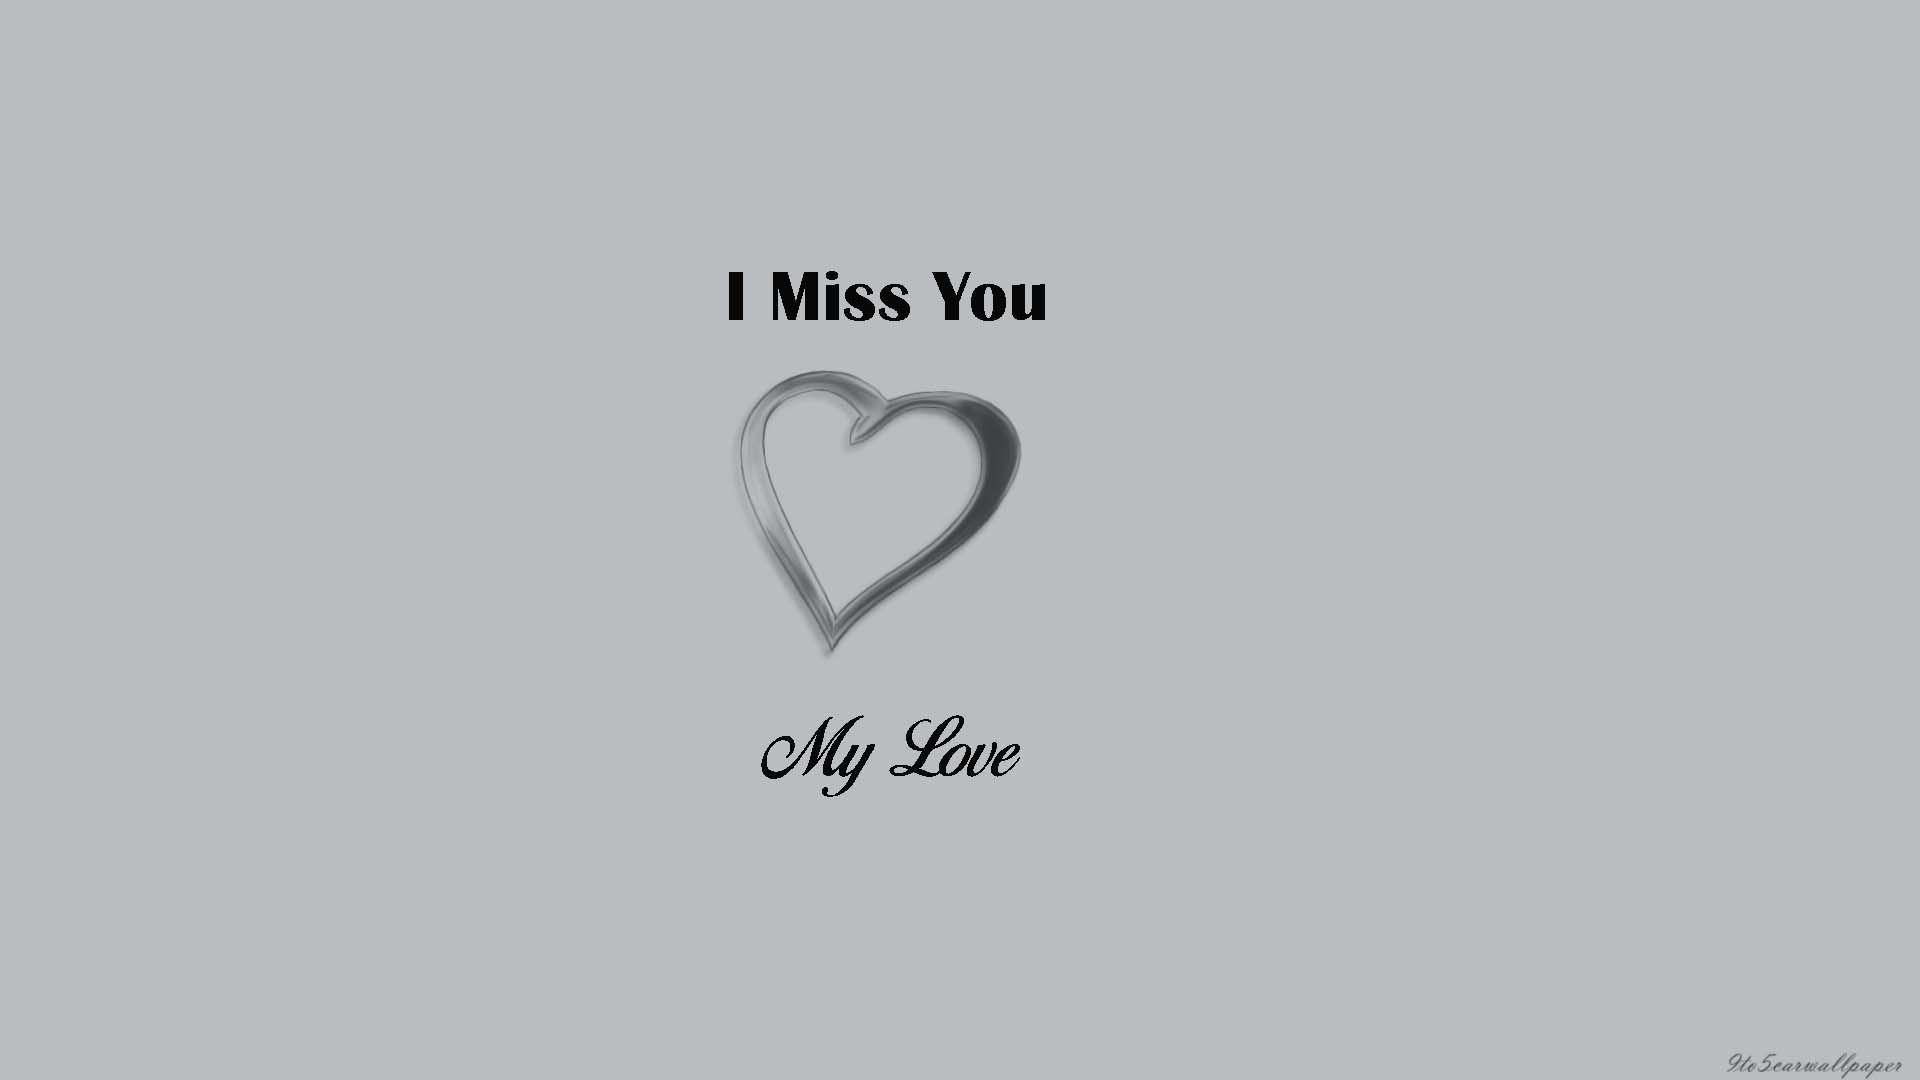 I Miss You My Love Wallpaper & Image